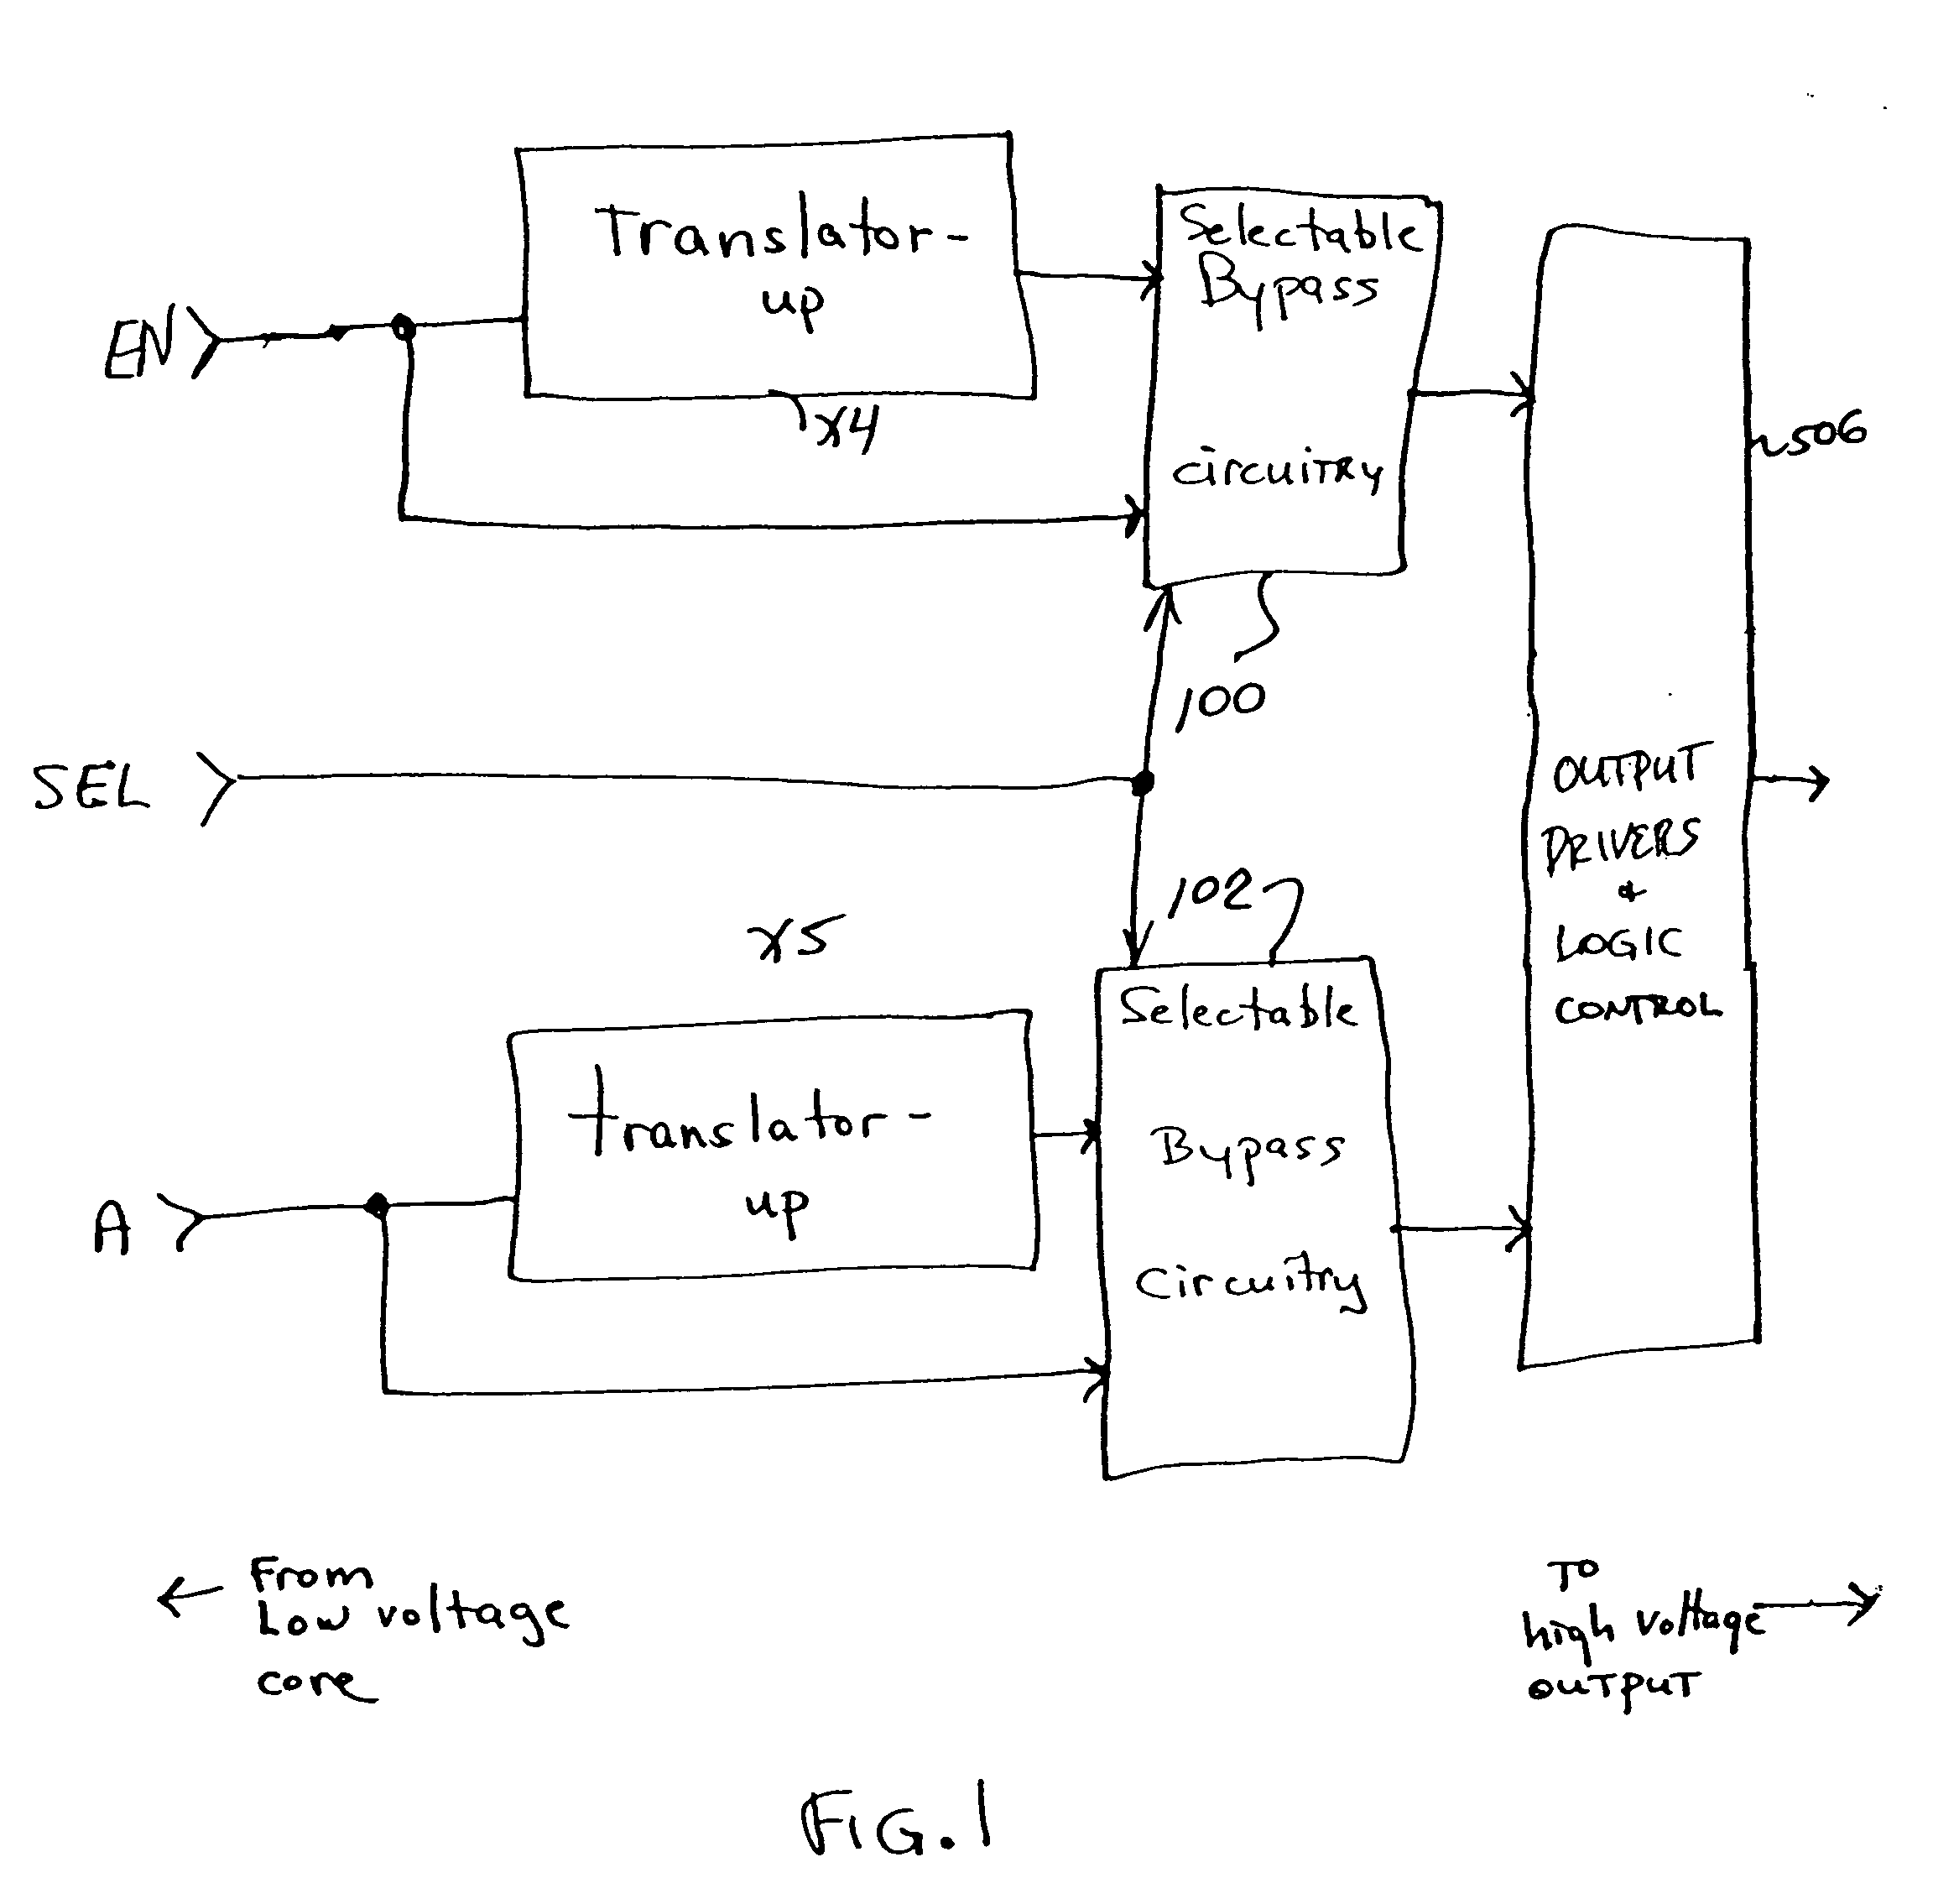 Coms buffer having higher and lower voltage operation